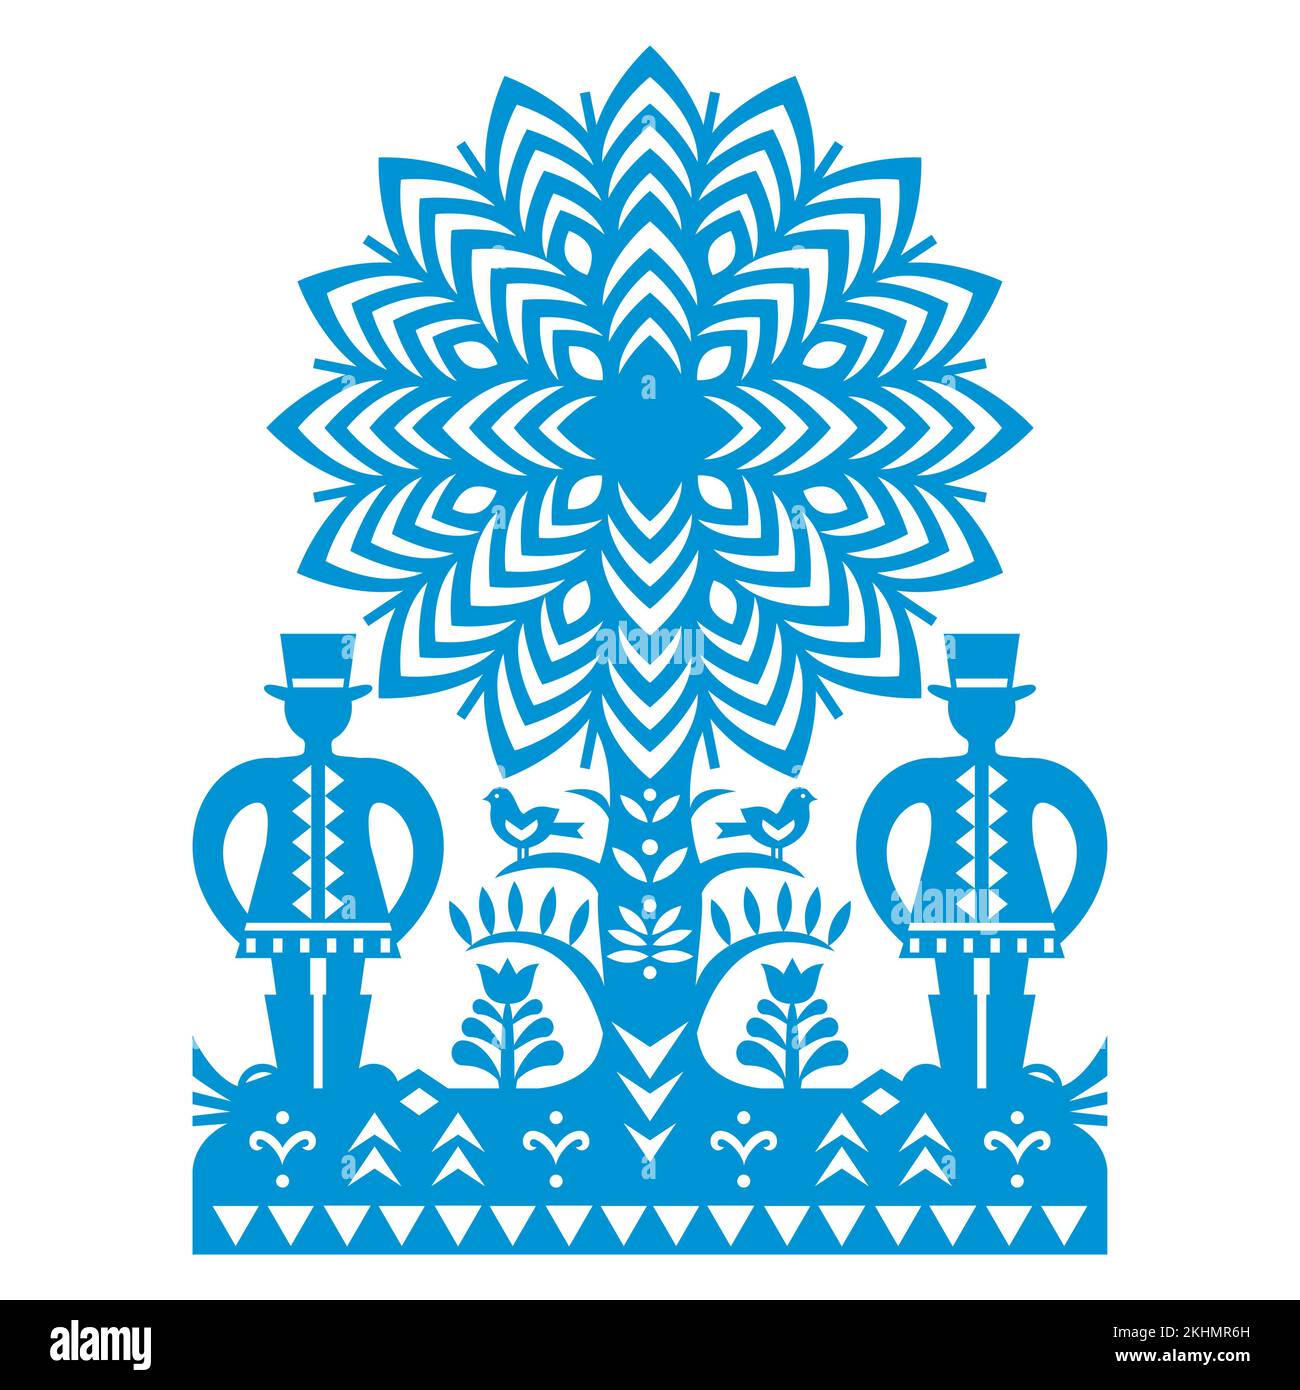 Polish folk art vector pattern Wycinanki Kurpiowskie with two men in hats, tree and birds - Kurpie paper cut outs design with rural scene Stock Vector